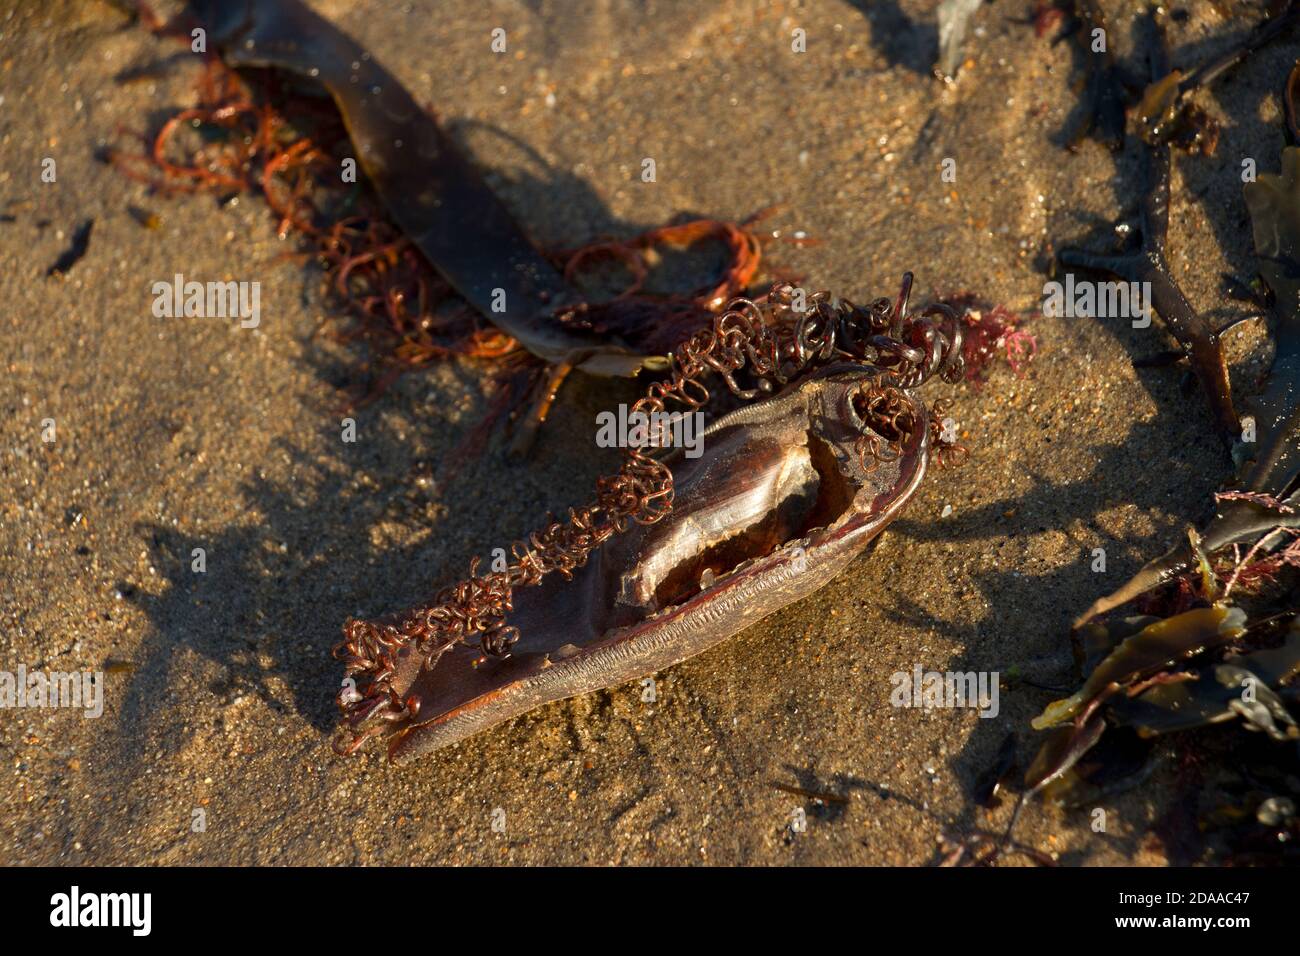 The egg case of a Small-spotted  Catshark or Dogfish are often washed ashore after storms after the young shark has hatched. Stock Photo